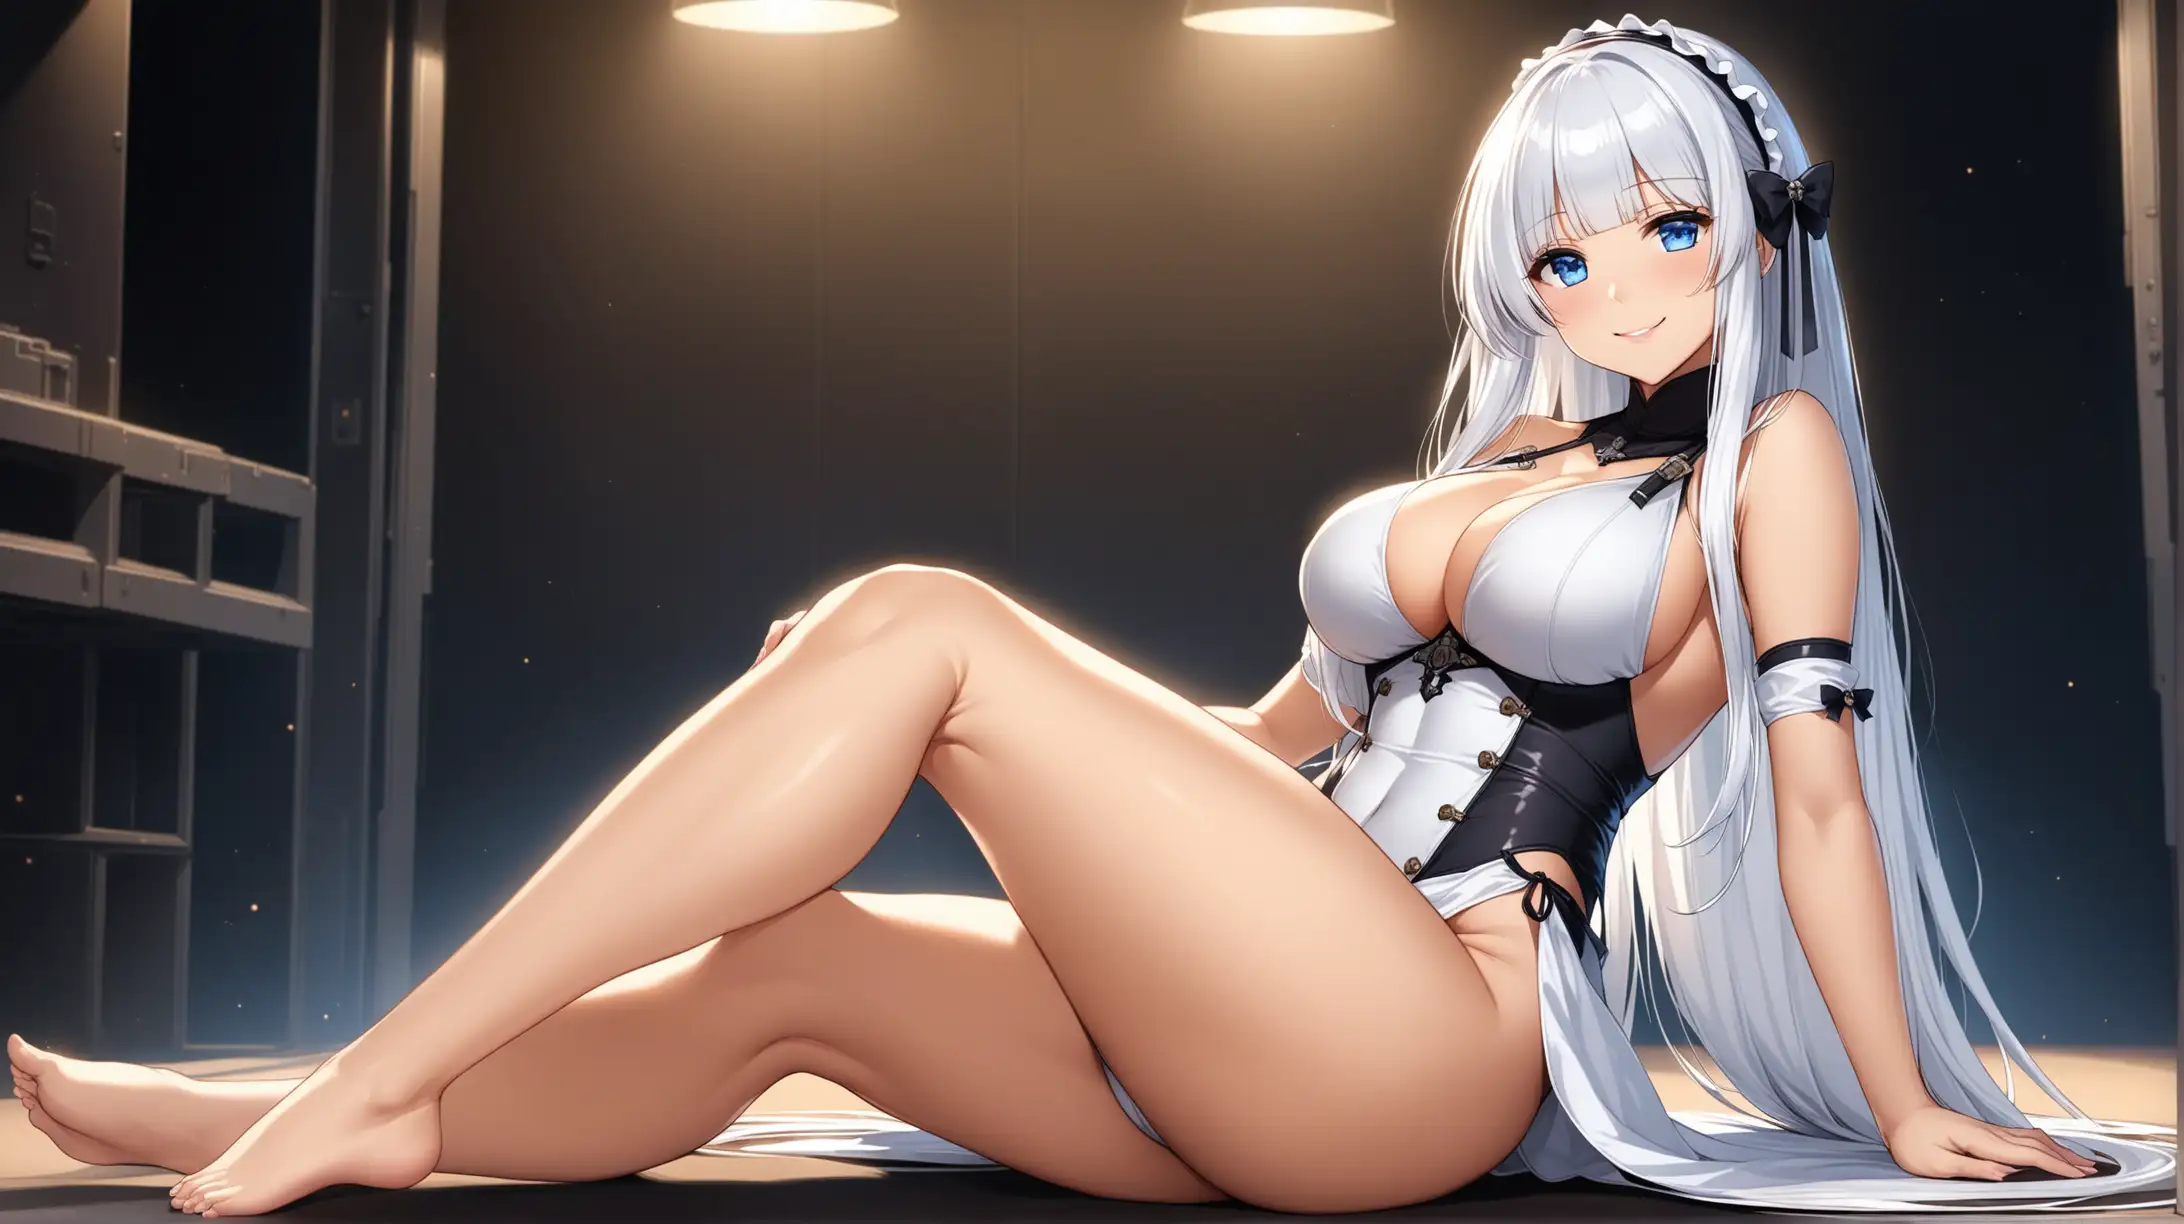 Draw the character Illustrious from Azur Lane, long hair, blue eyes, high quality, indoors, dim lighting, in a seductive pose, legs spread, wearing an outfit inspired from the Fallout series, smiling at the viewer